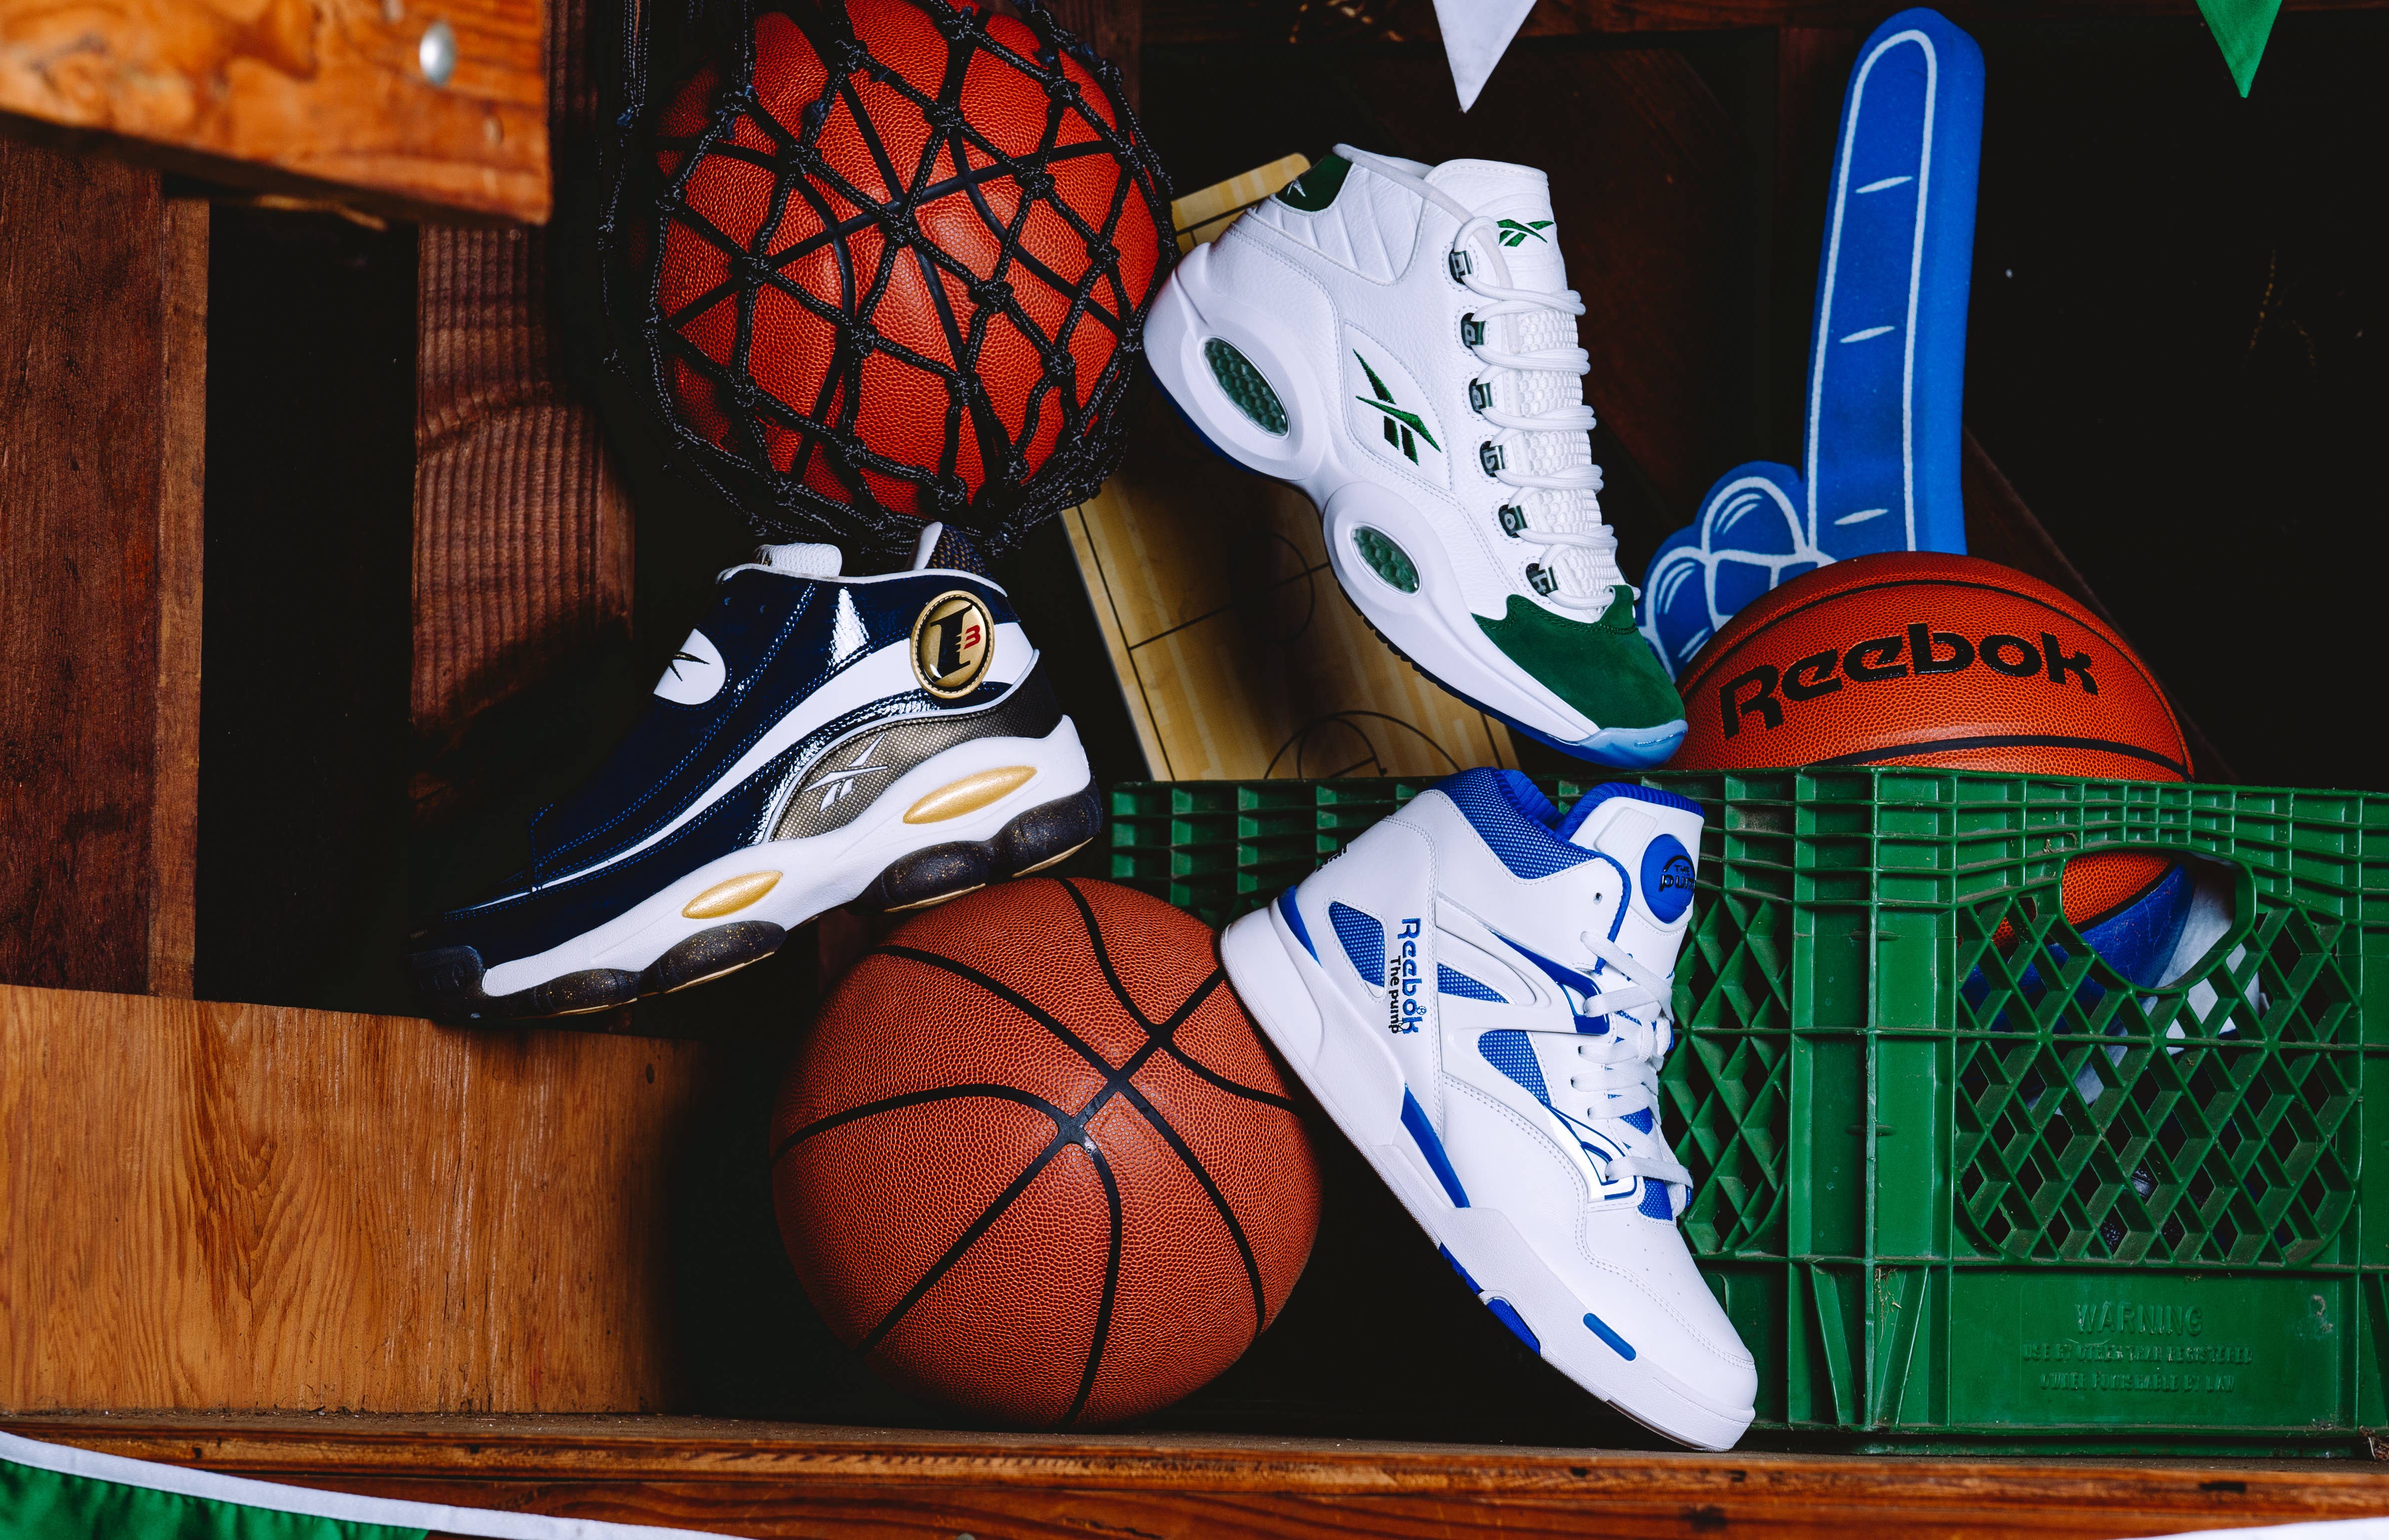 Reebok Basketball 'Collegiate Pack' for March Madness |